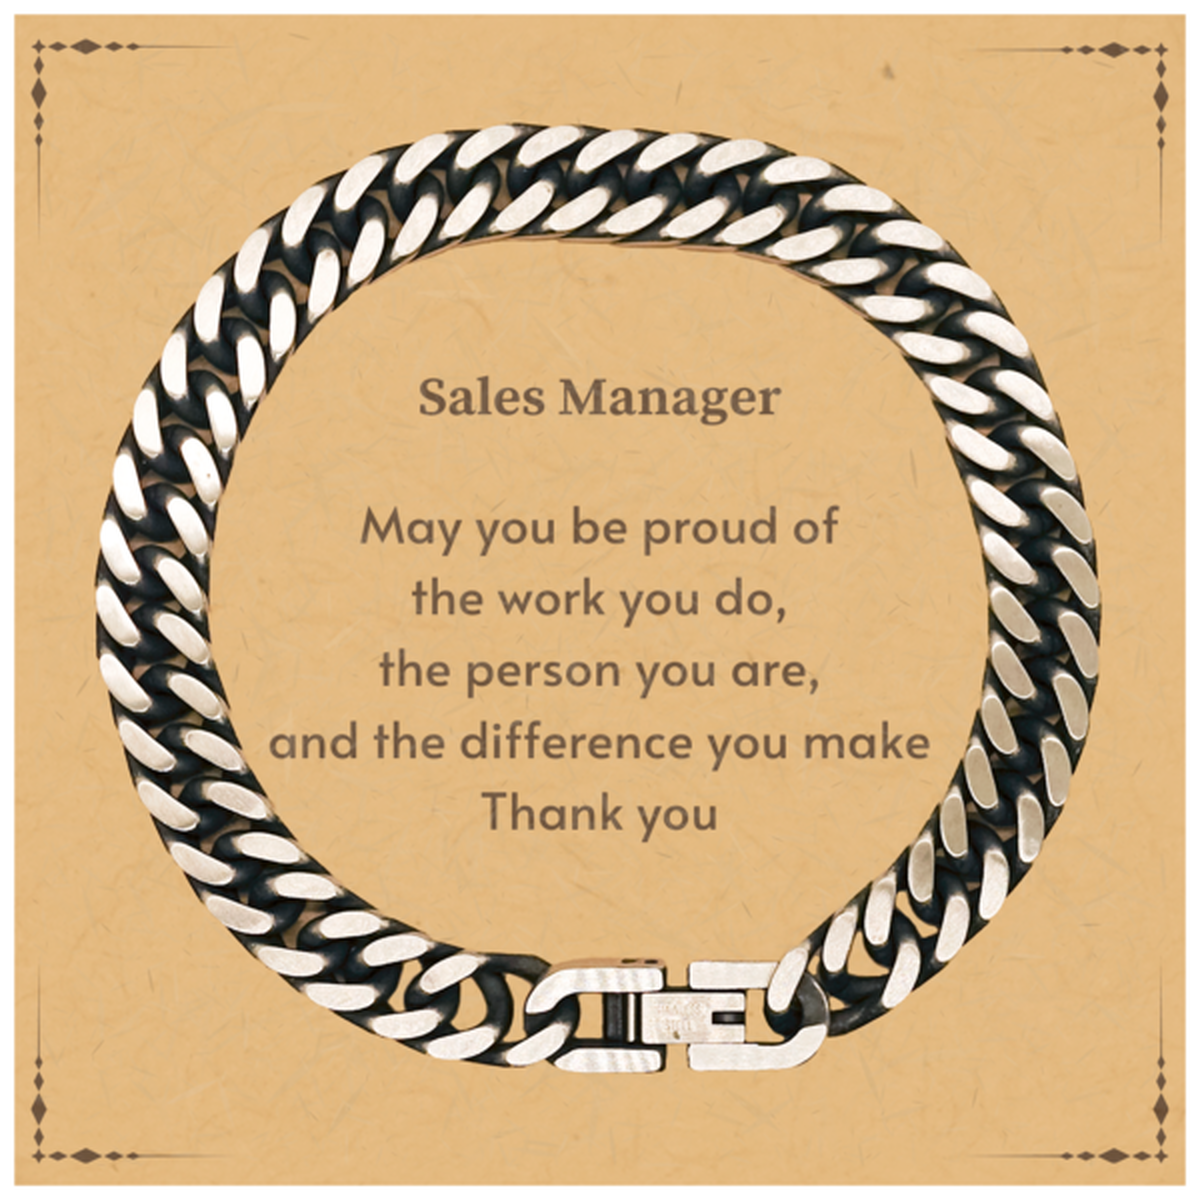 Heartwarming Cuban Link Chain Bracelet Retirement Coworkers Gifts for Sales Manager, Sales Manager May You be proud of the work you do, the person you are Gifts for Boss Men Women Friends